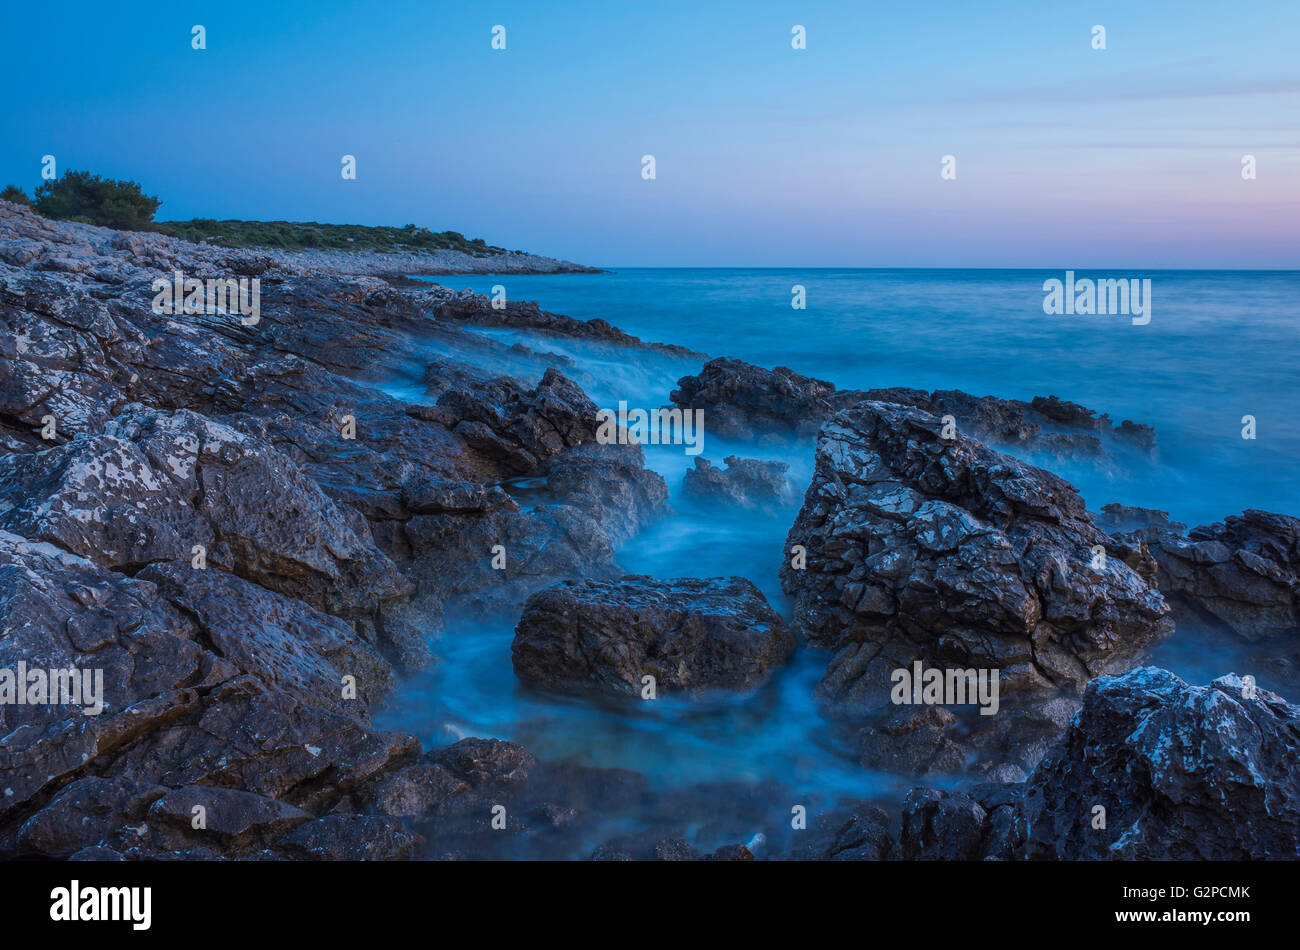 Razanj Croatia Europe. Landscape and nature photo. Adriatic Sea at dawn after sunset. Calm warm summer evening with beautiful colors and tones. Stock Photo